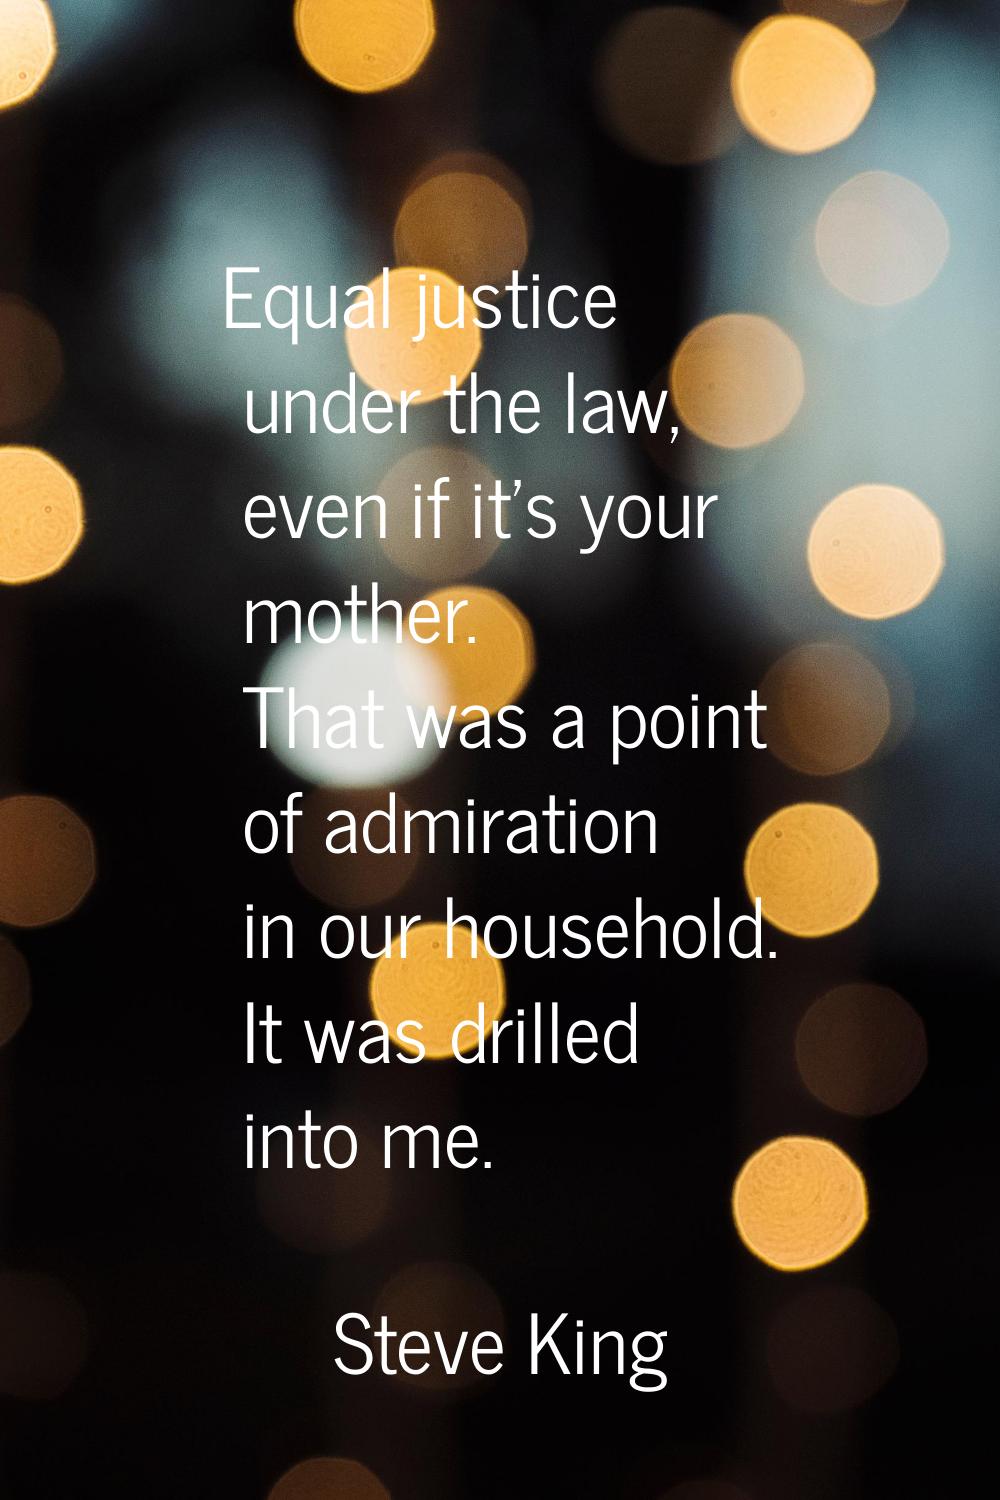 Equal justice under the law, even if it's your mother. That was a point of admiration in our househ